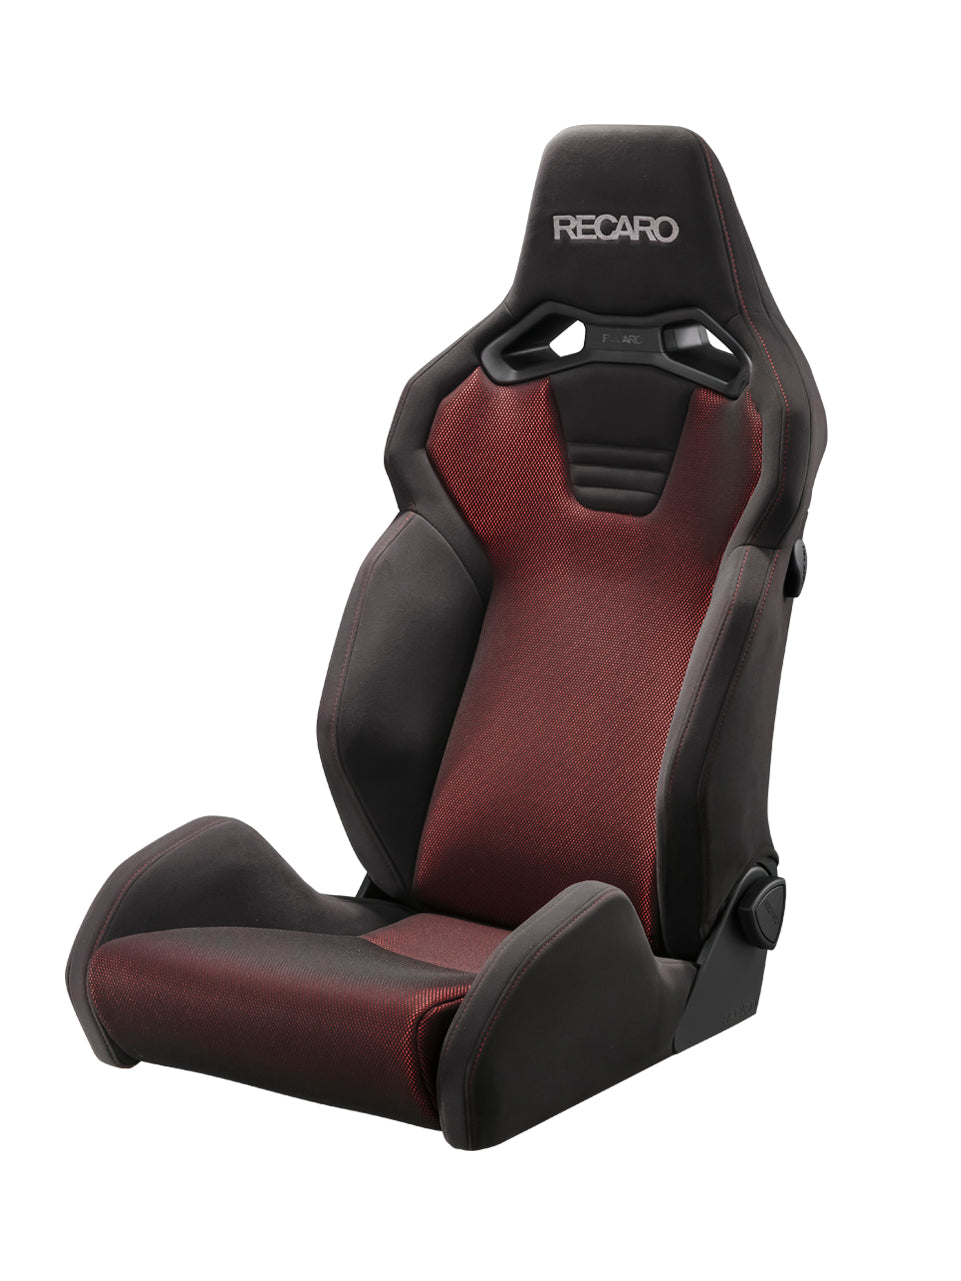 RECARO SR-S BK100 RD BK BRILLIANT MESH RED AND BLACK COLOR WITH HEATED SEATS 81-120.21.641-0